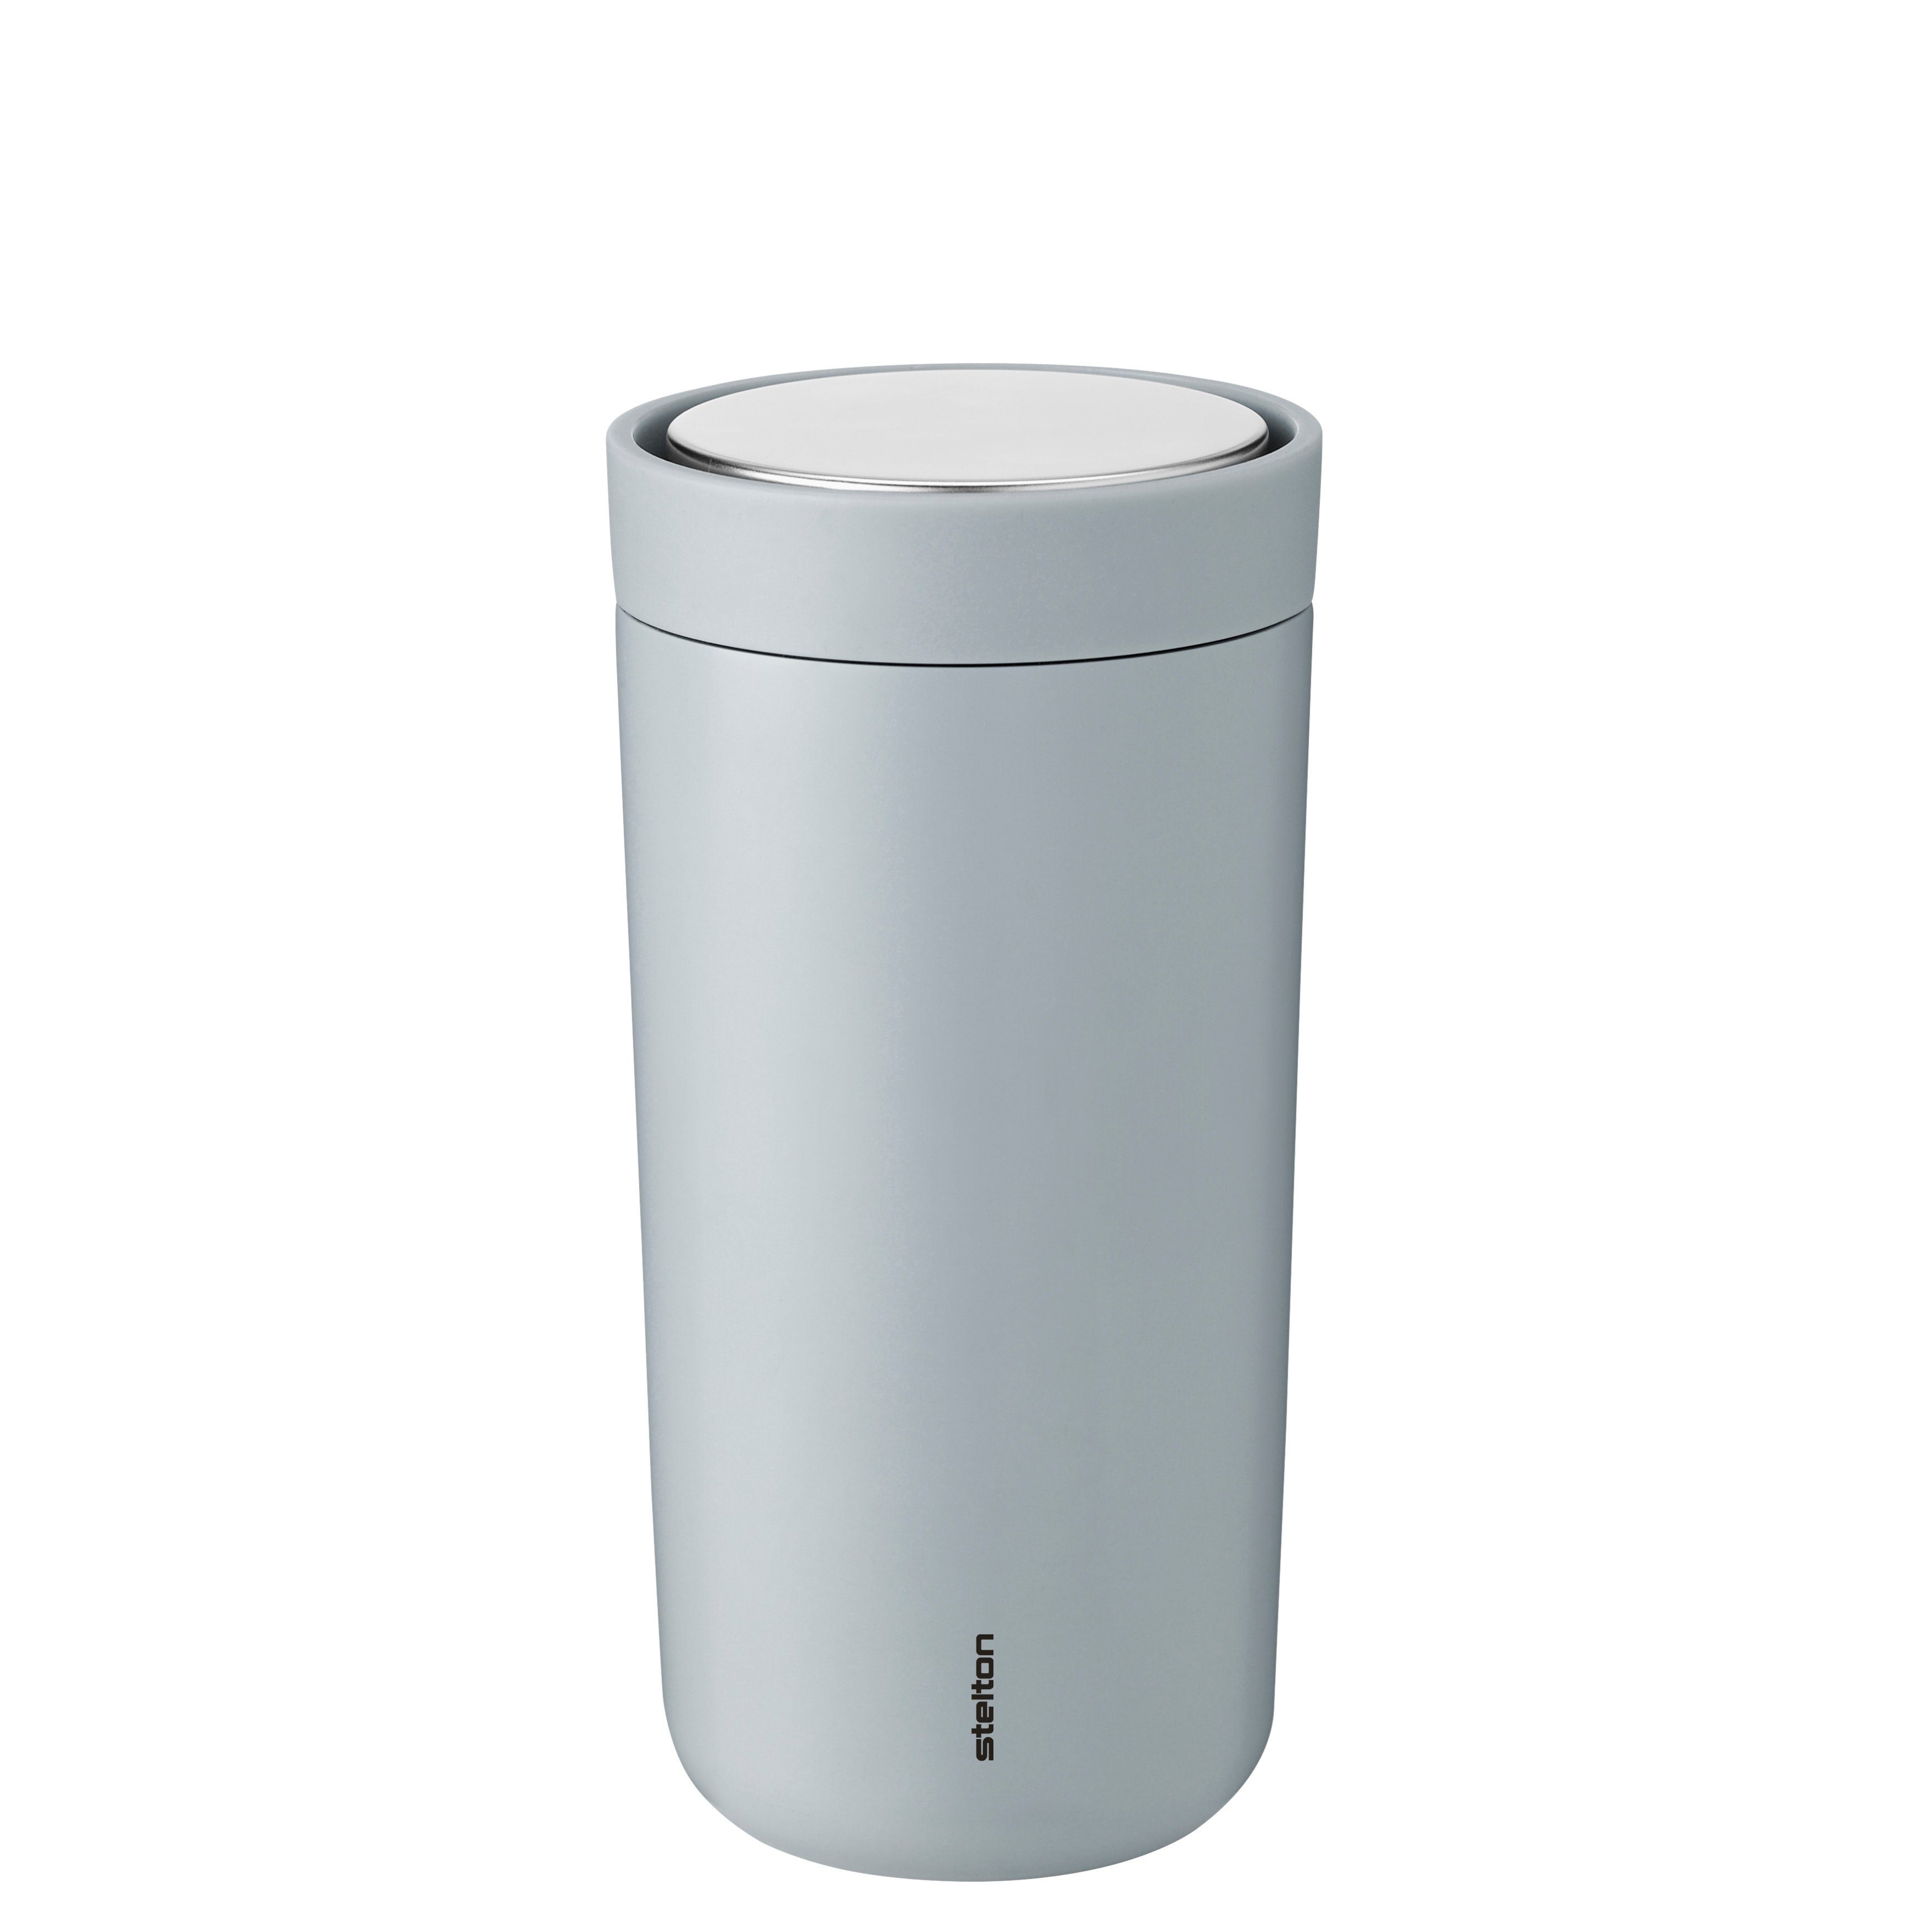 Stelton Thermobecher Stelton To Go Click Thermobecher 0.4 l. Soft cloud, Edelstahl